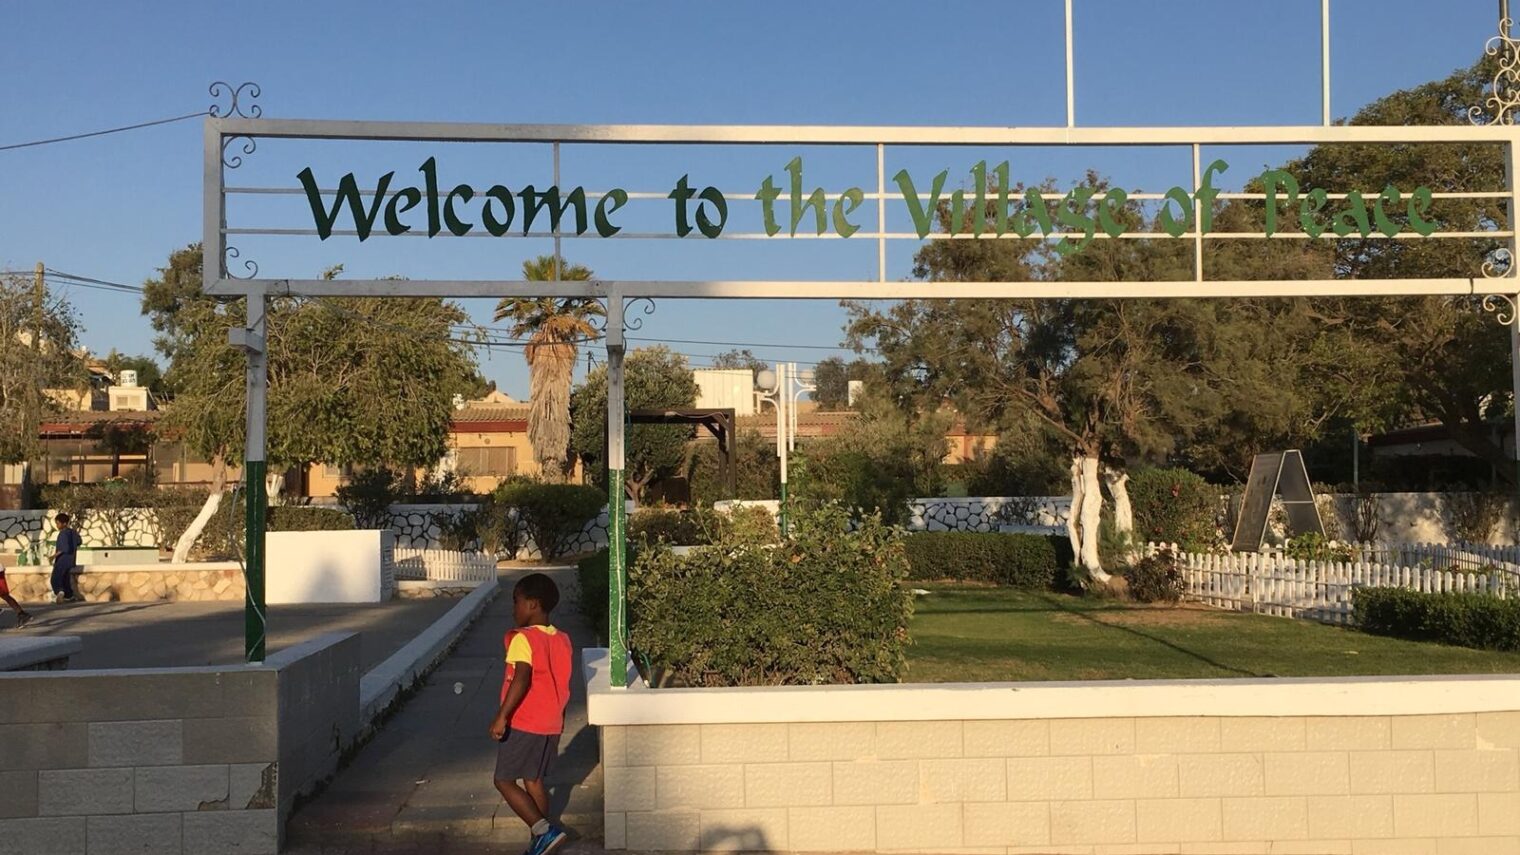 The Village of Peace in Dimona, Israel, is the home of the Hebrew Israelites. Photo by Matthew Allen